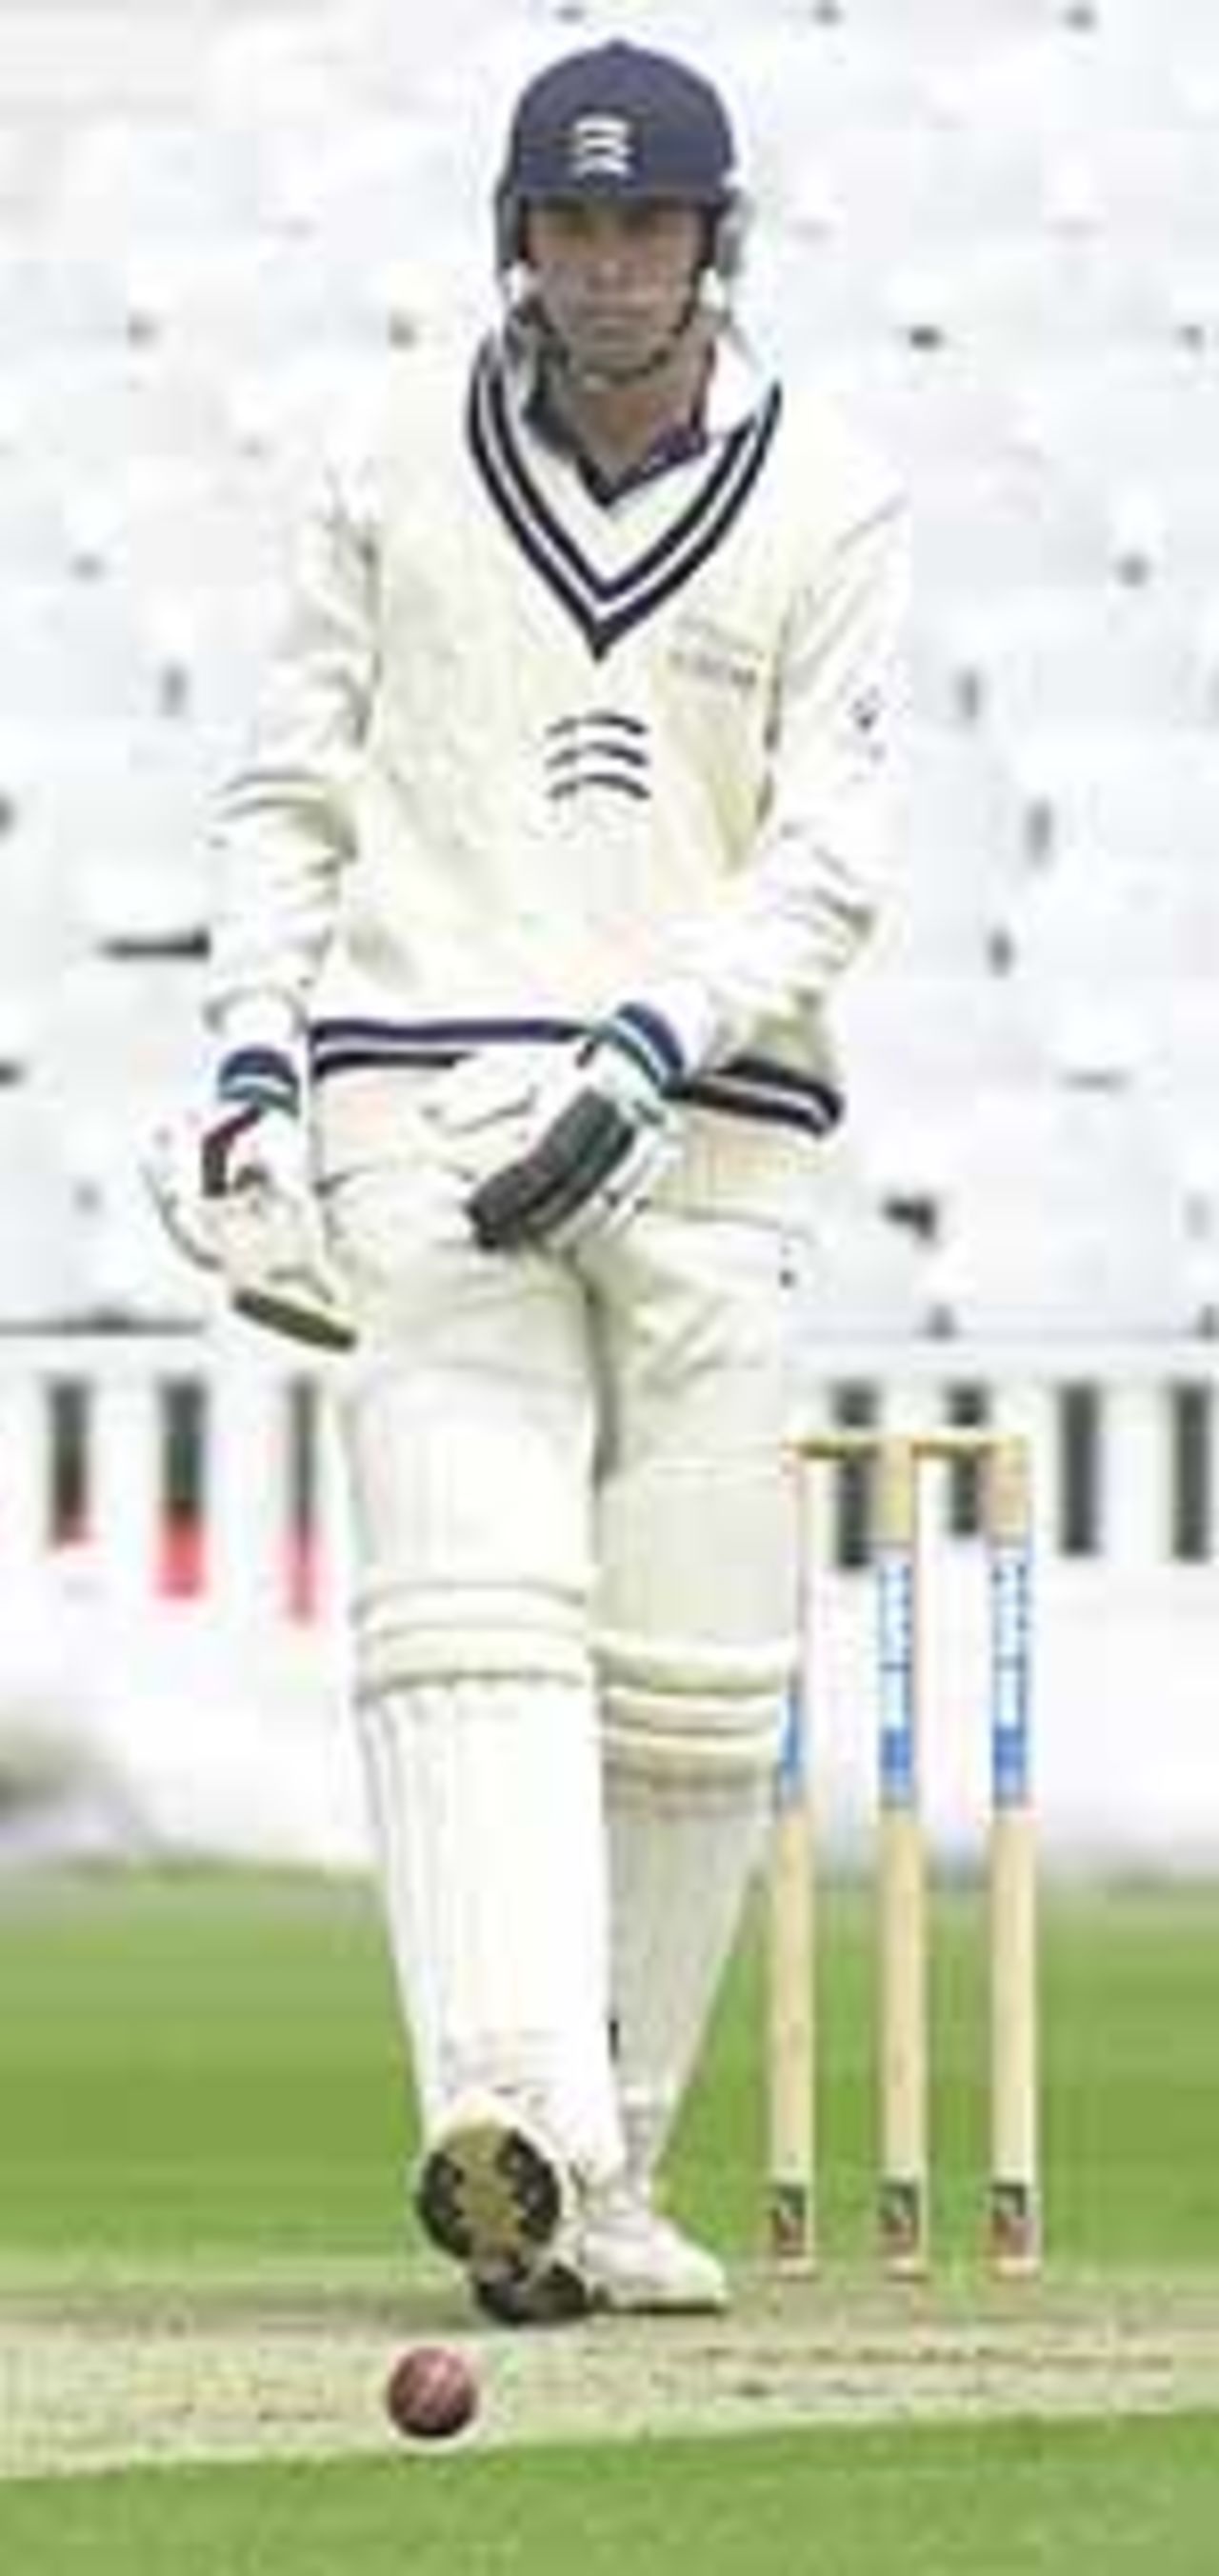 Pictured at Birmingham , June 2001 playing for Middlesex